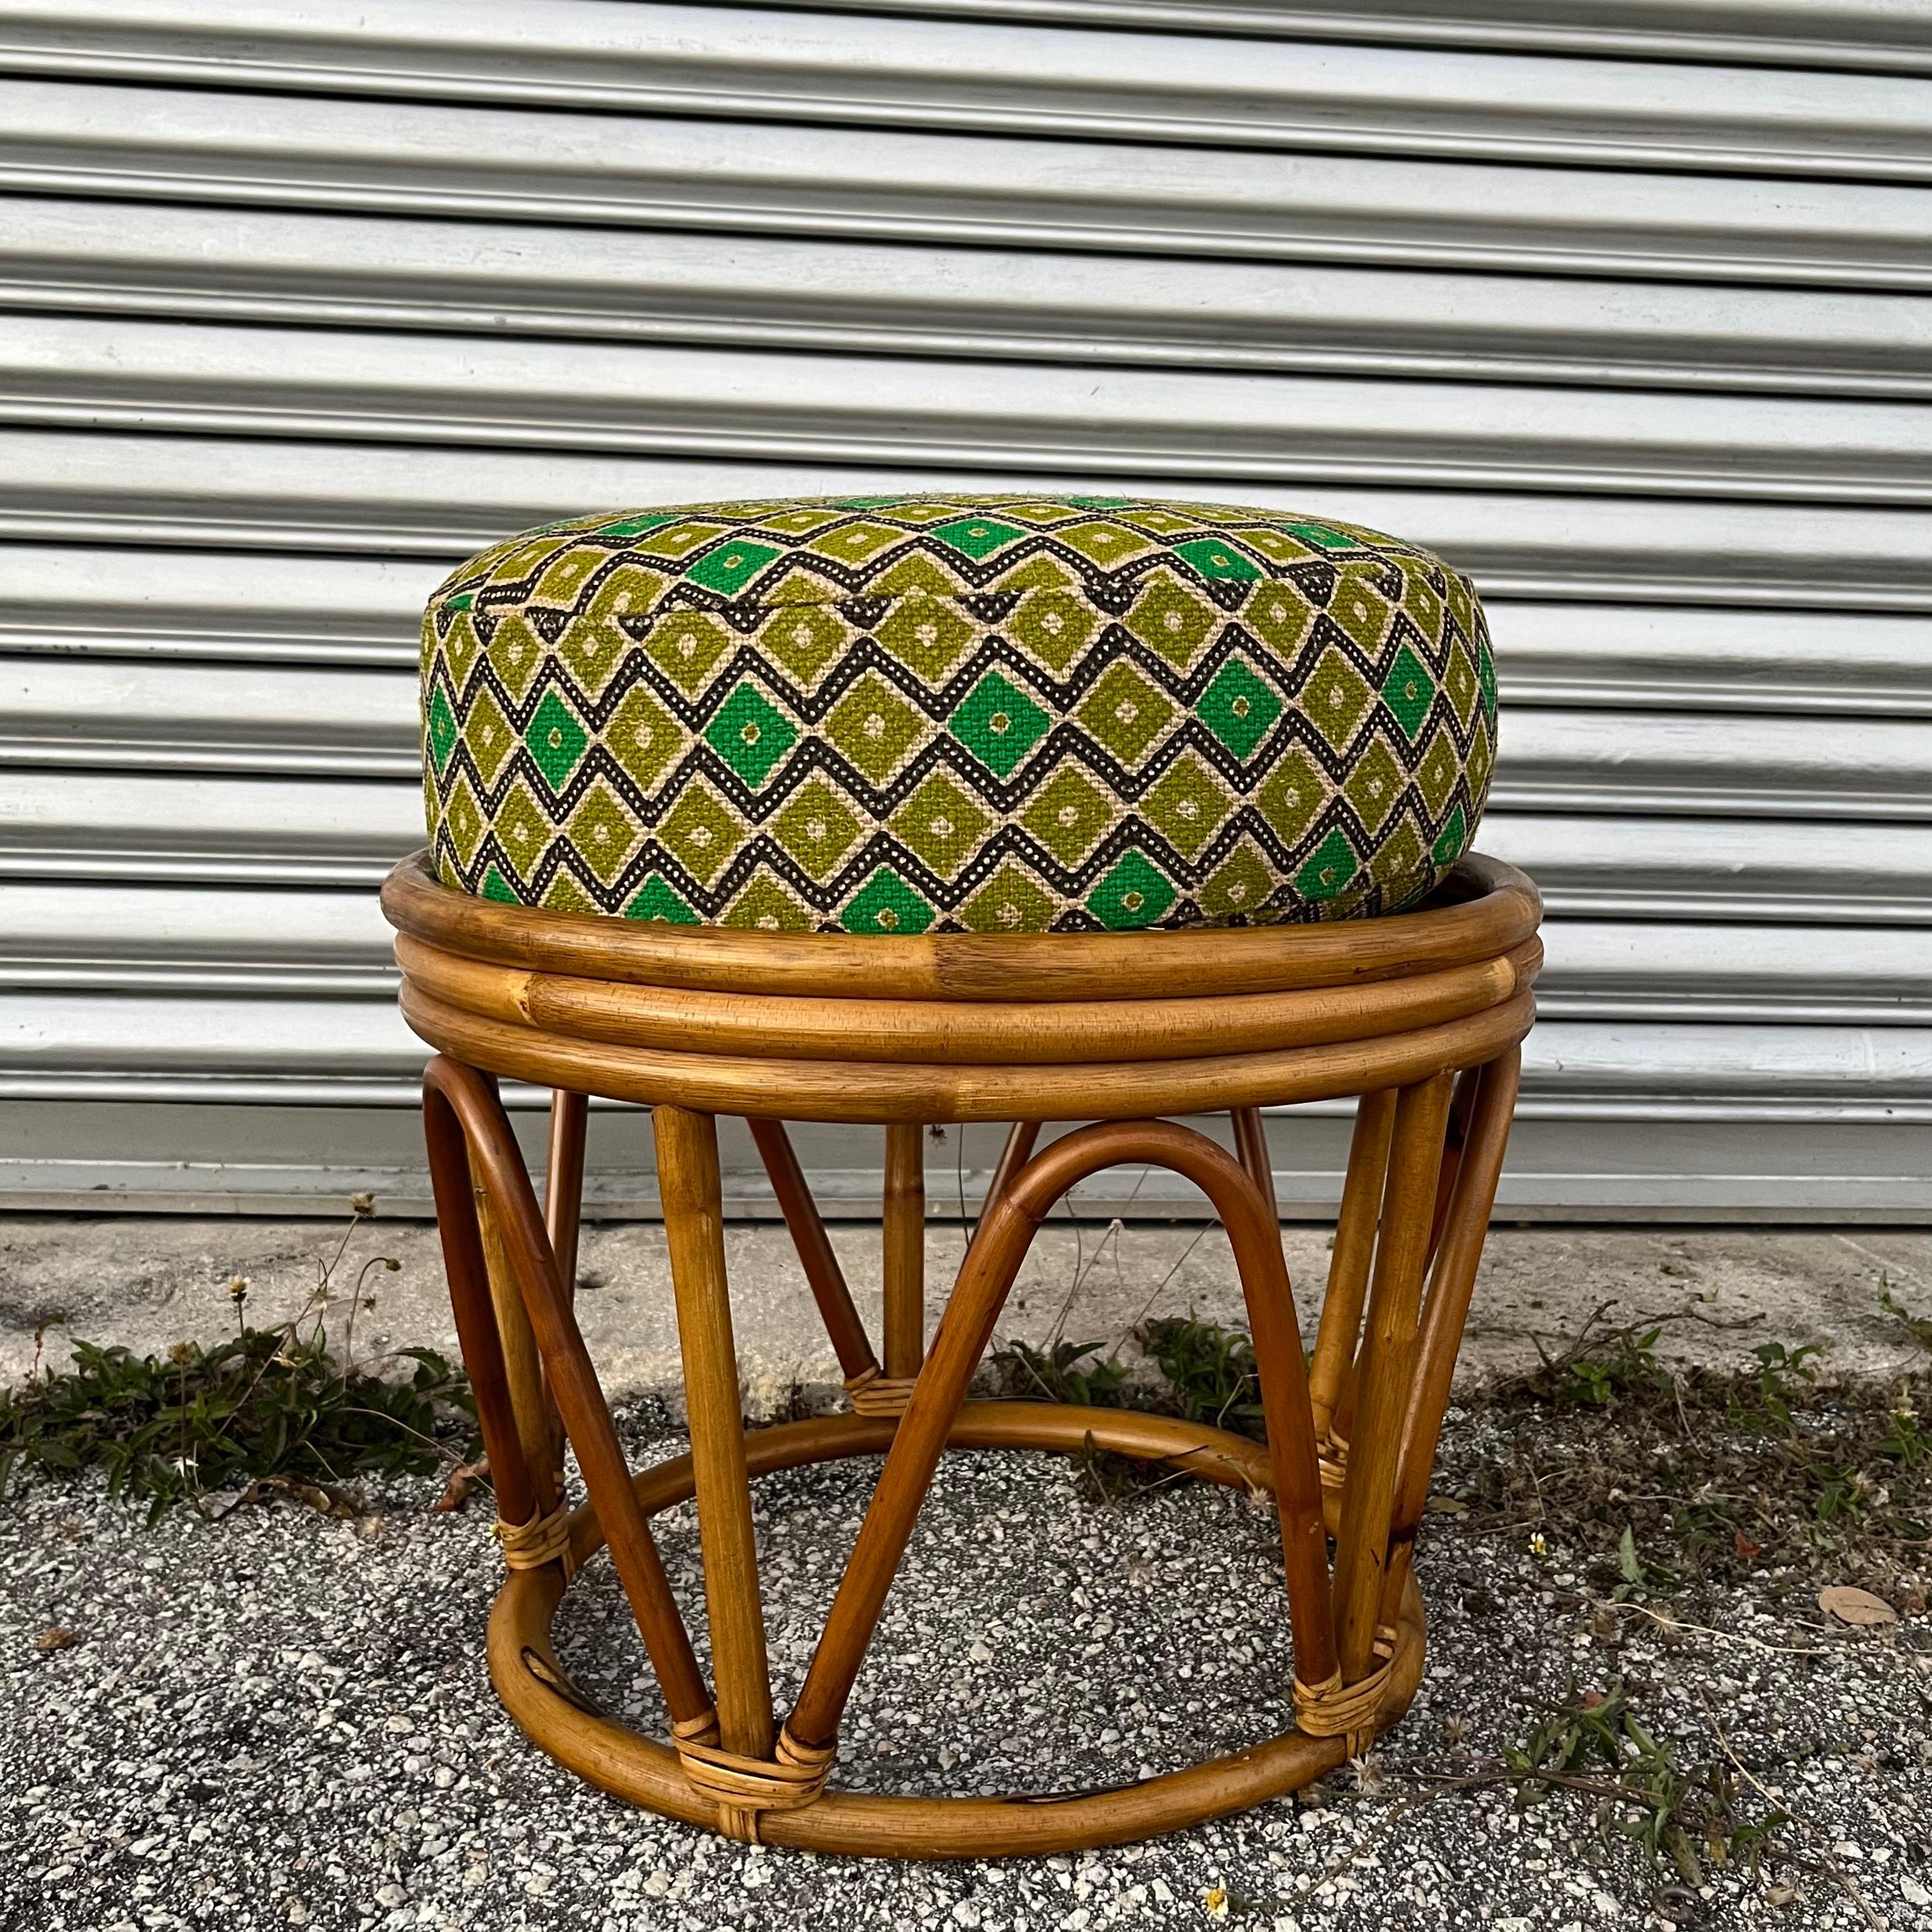 Vintage Coastal Style Bohemian Rattan Footstool / Ottoman. Circa 1970s
Features a bent rattan frame and a removable round cushion.
In excellent original condition with very minor signs of wear and age. The Cushion has been recently reupholstered